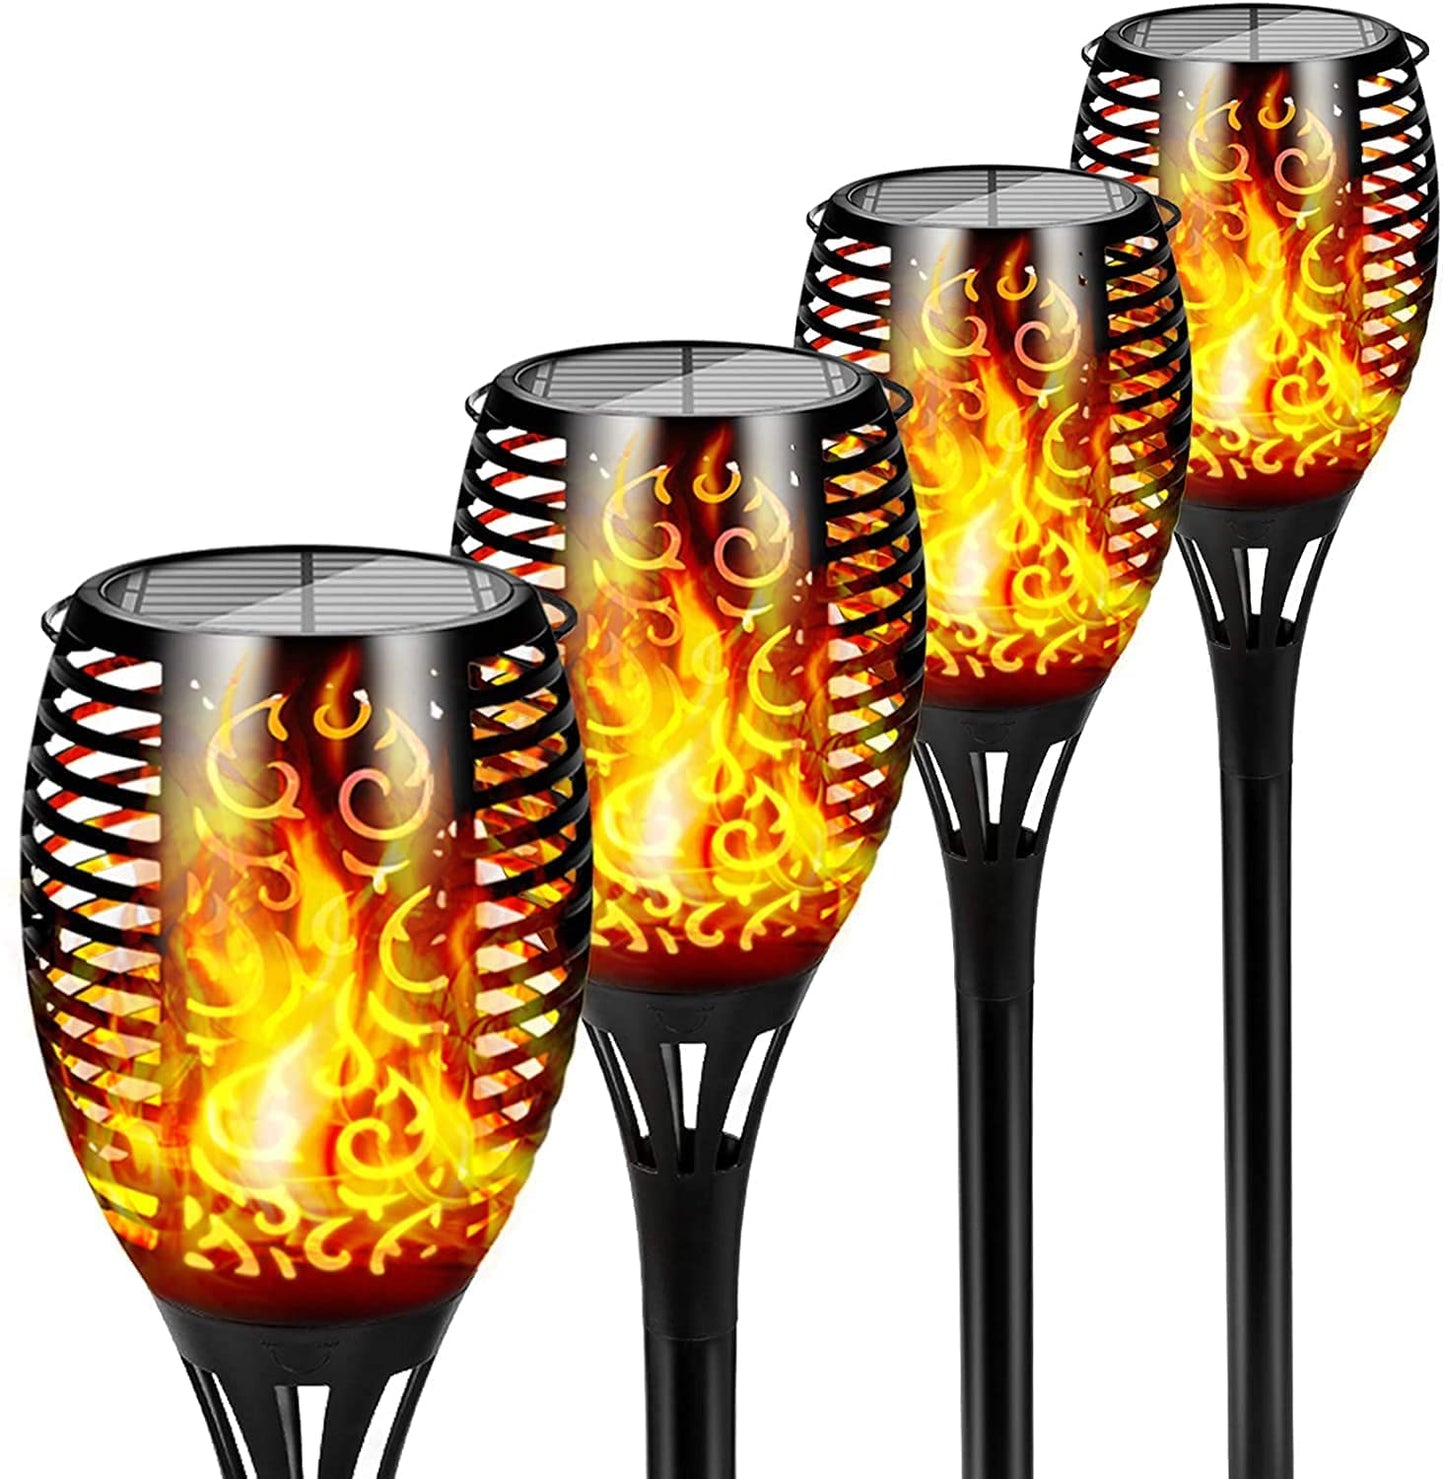 Solar Powered Torch Lights 4 Pack